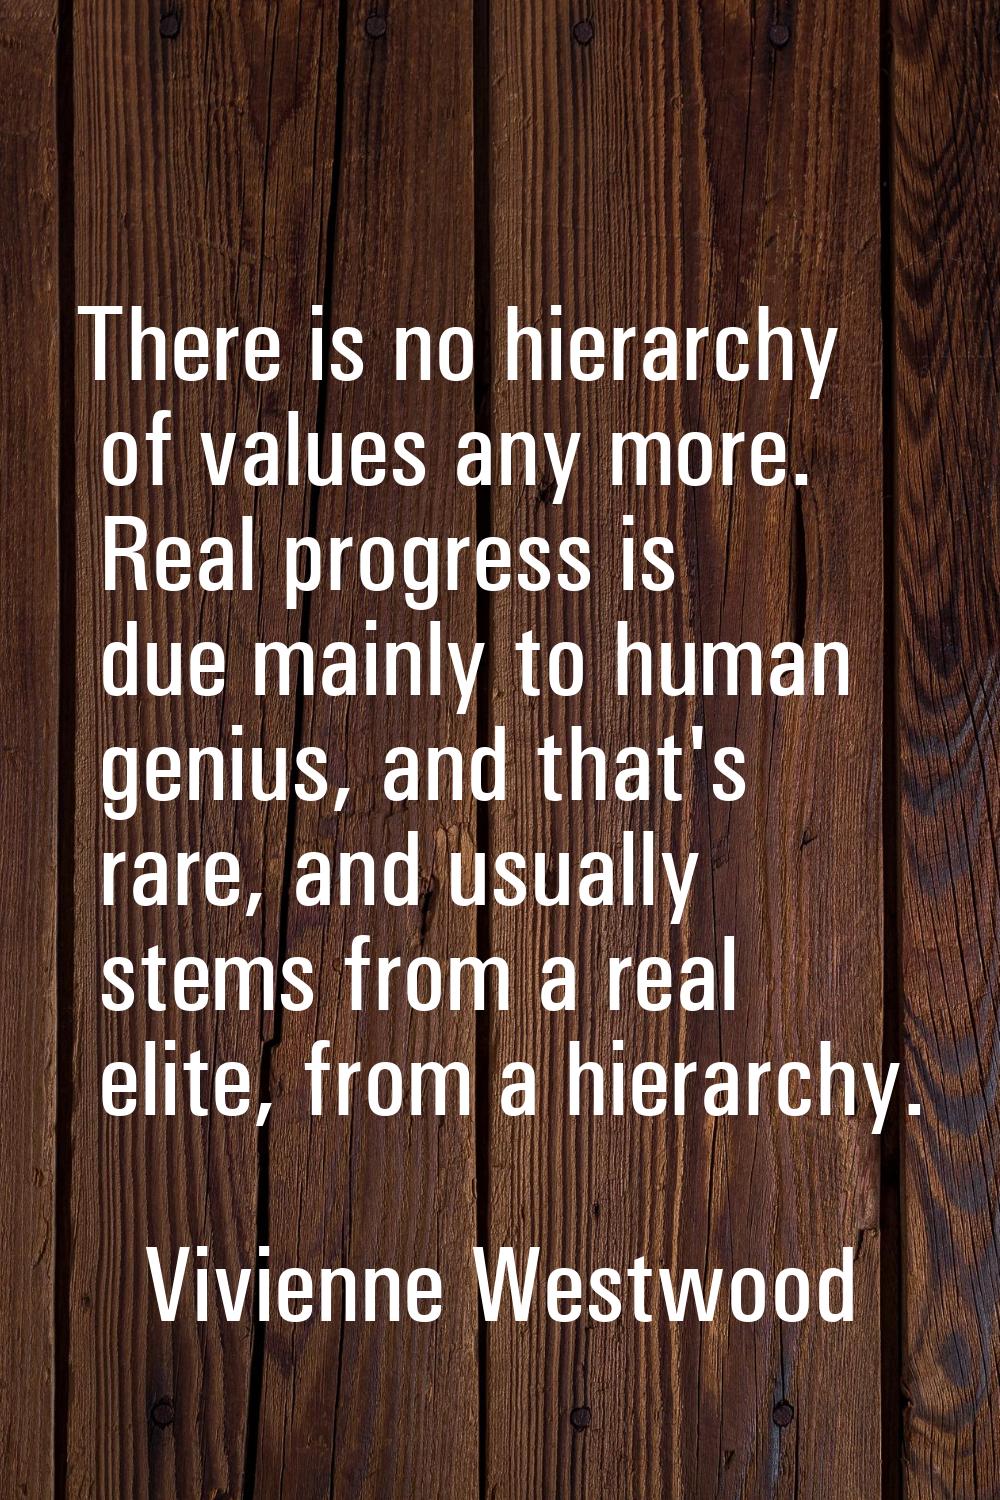 There is no hierarchy of values any more. Real progress is due mainly to human genius, and that's r